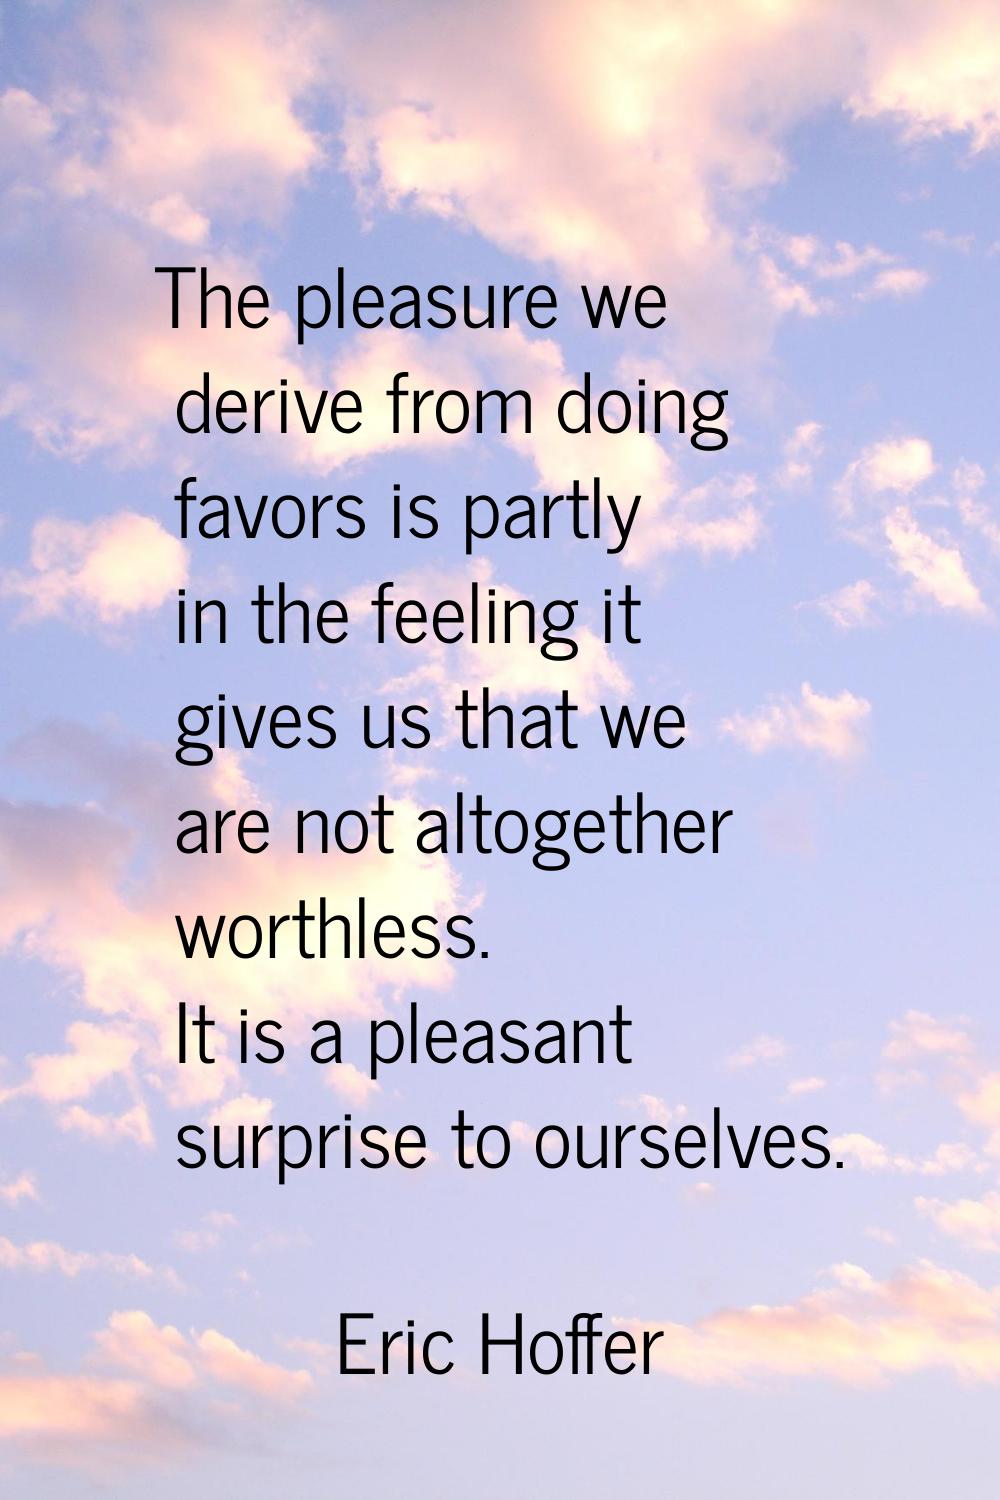 The pleasure we derive from doing favors is partly in the feeling it gives us that we are not altog